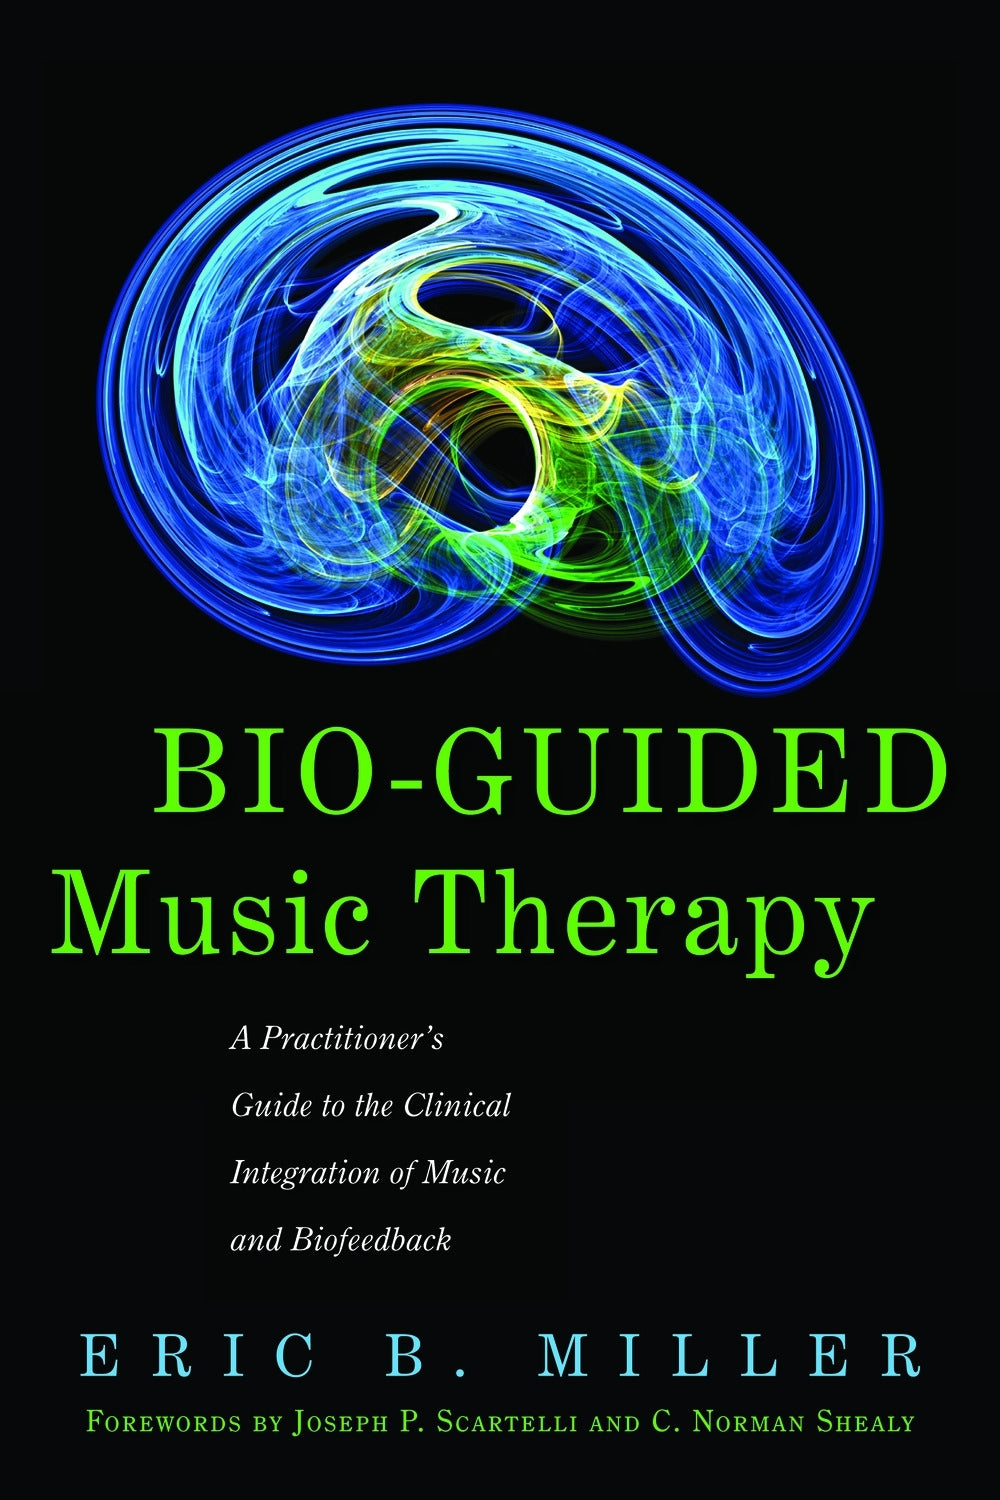 Bio-Guided Music Therapy by Eric B. Miller, Joseph P. Scartelli, C. Norman Shealy